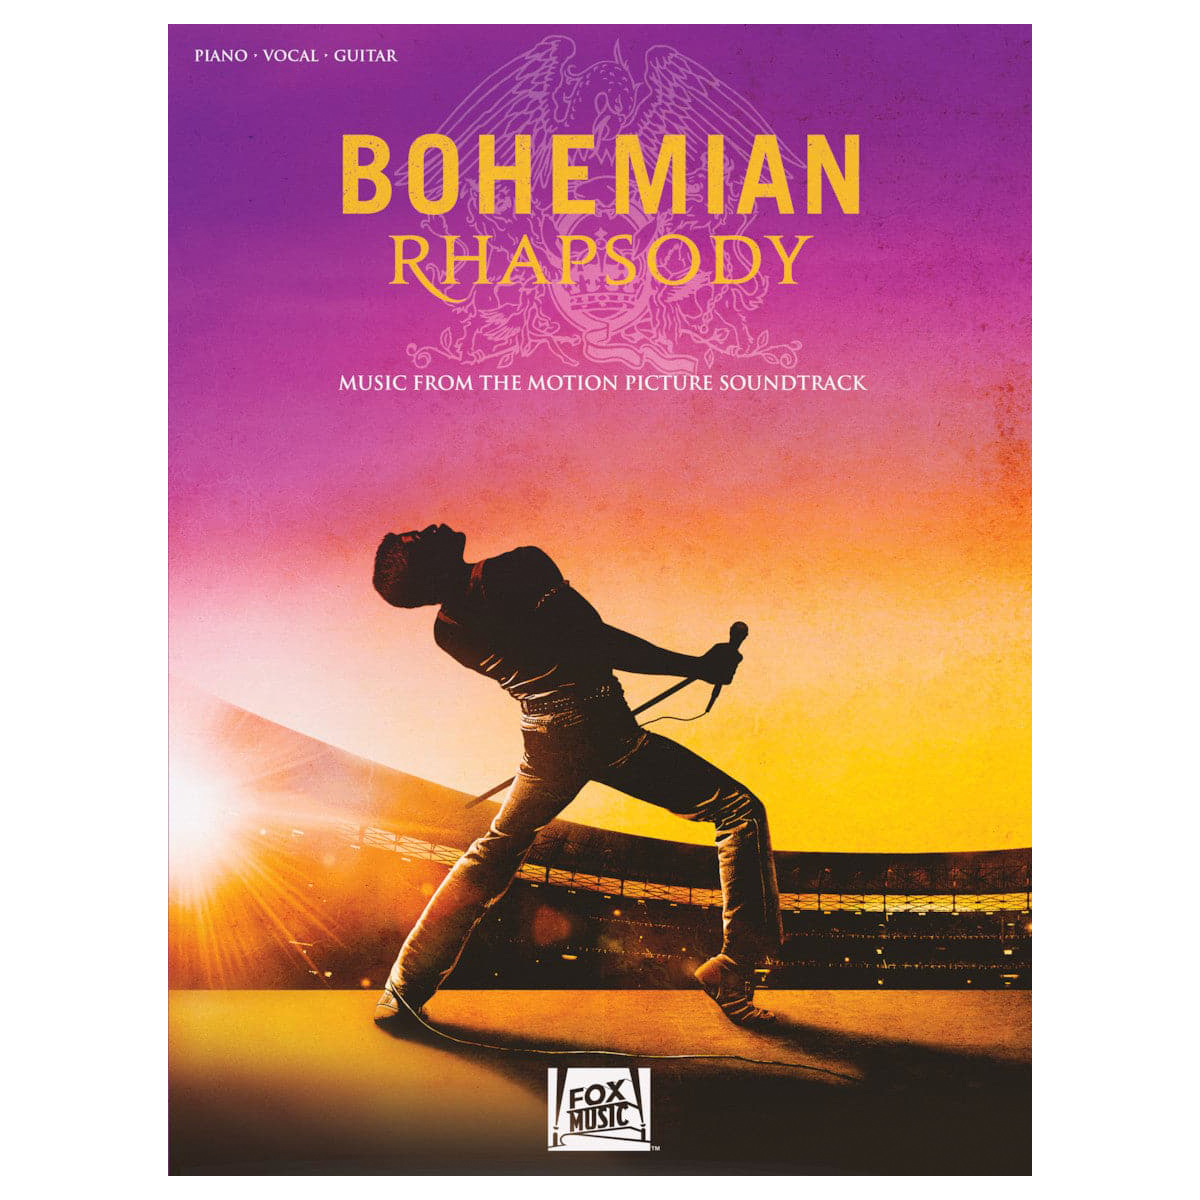 Bohemian Rhapsody: Music From The Motion Picture Soundtrack